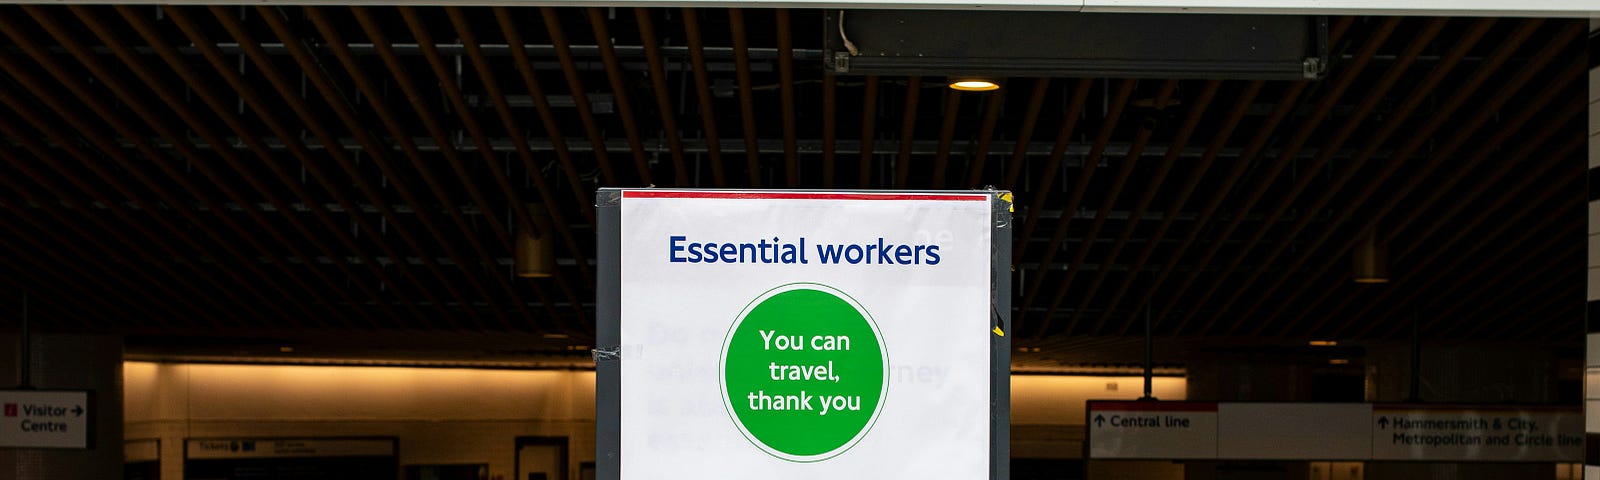 A sign in the London Tube alludes to the fact that those with COVID whould not travel.